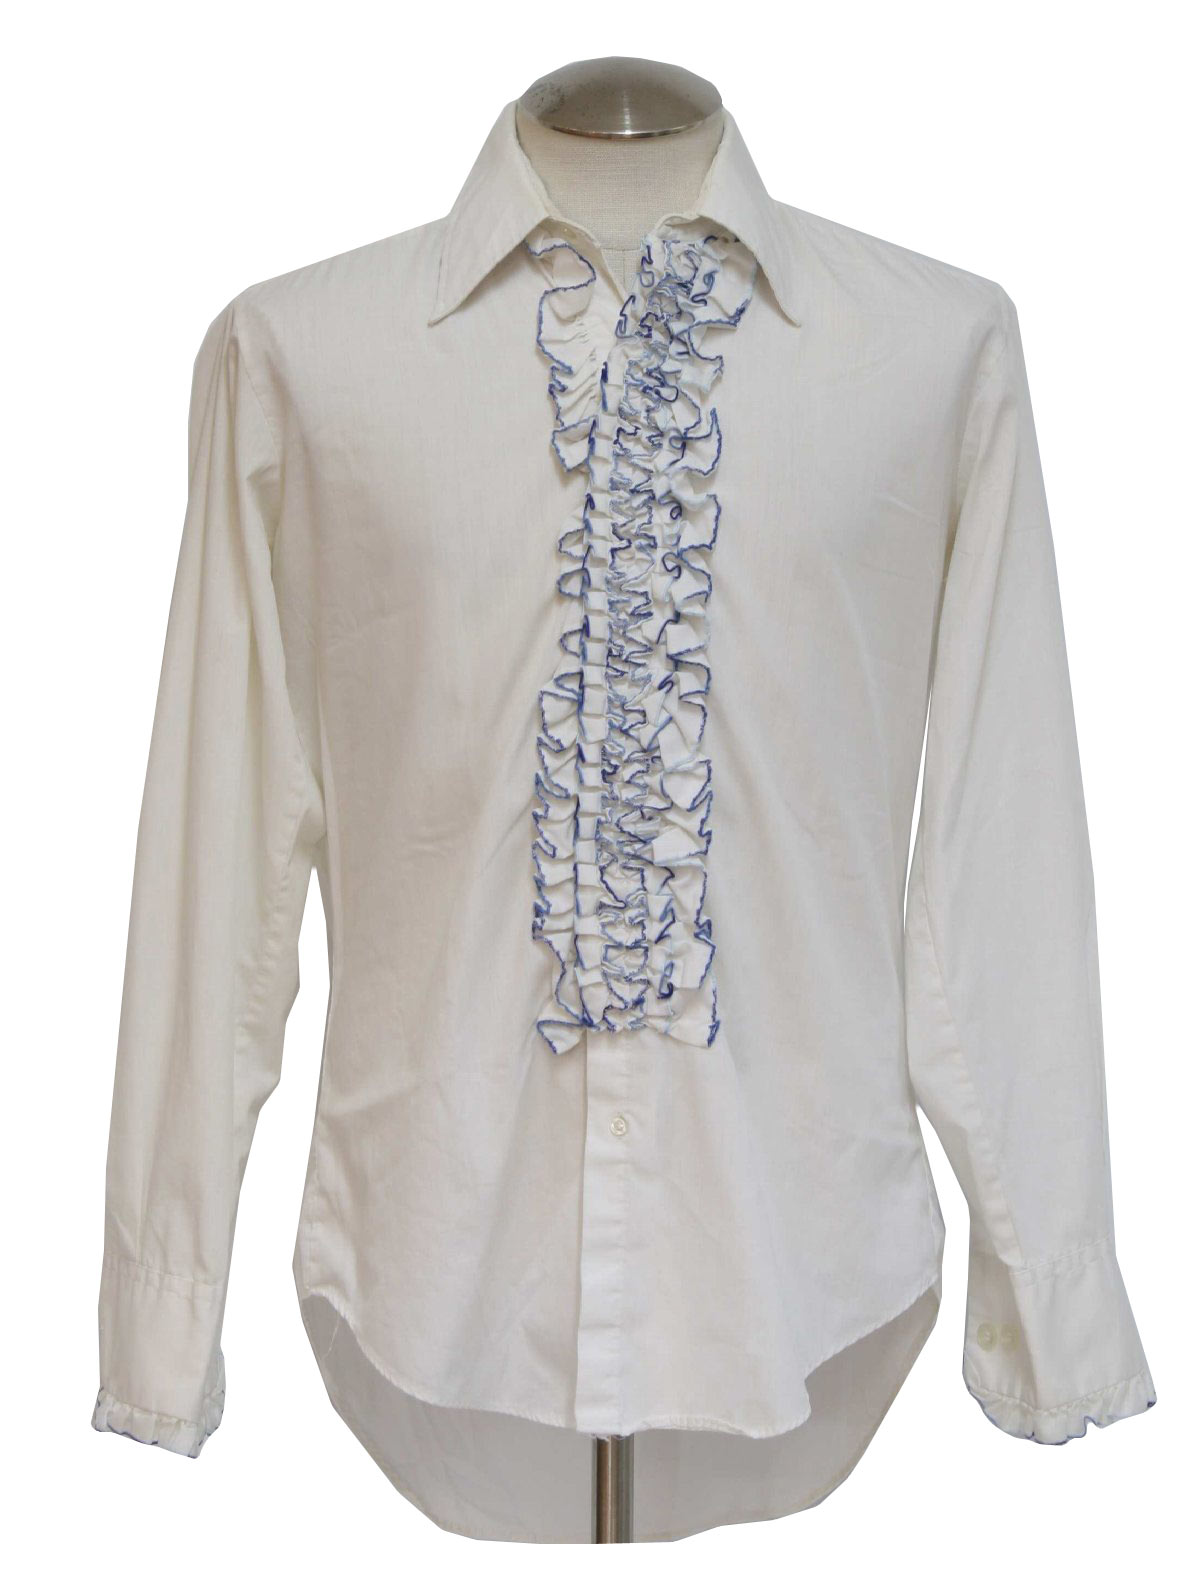 1970s After Six Shirt: 70s -After Six- Mens white and shaded blue ...